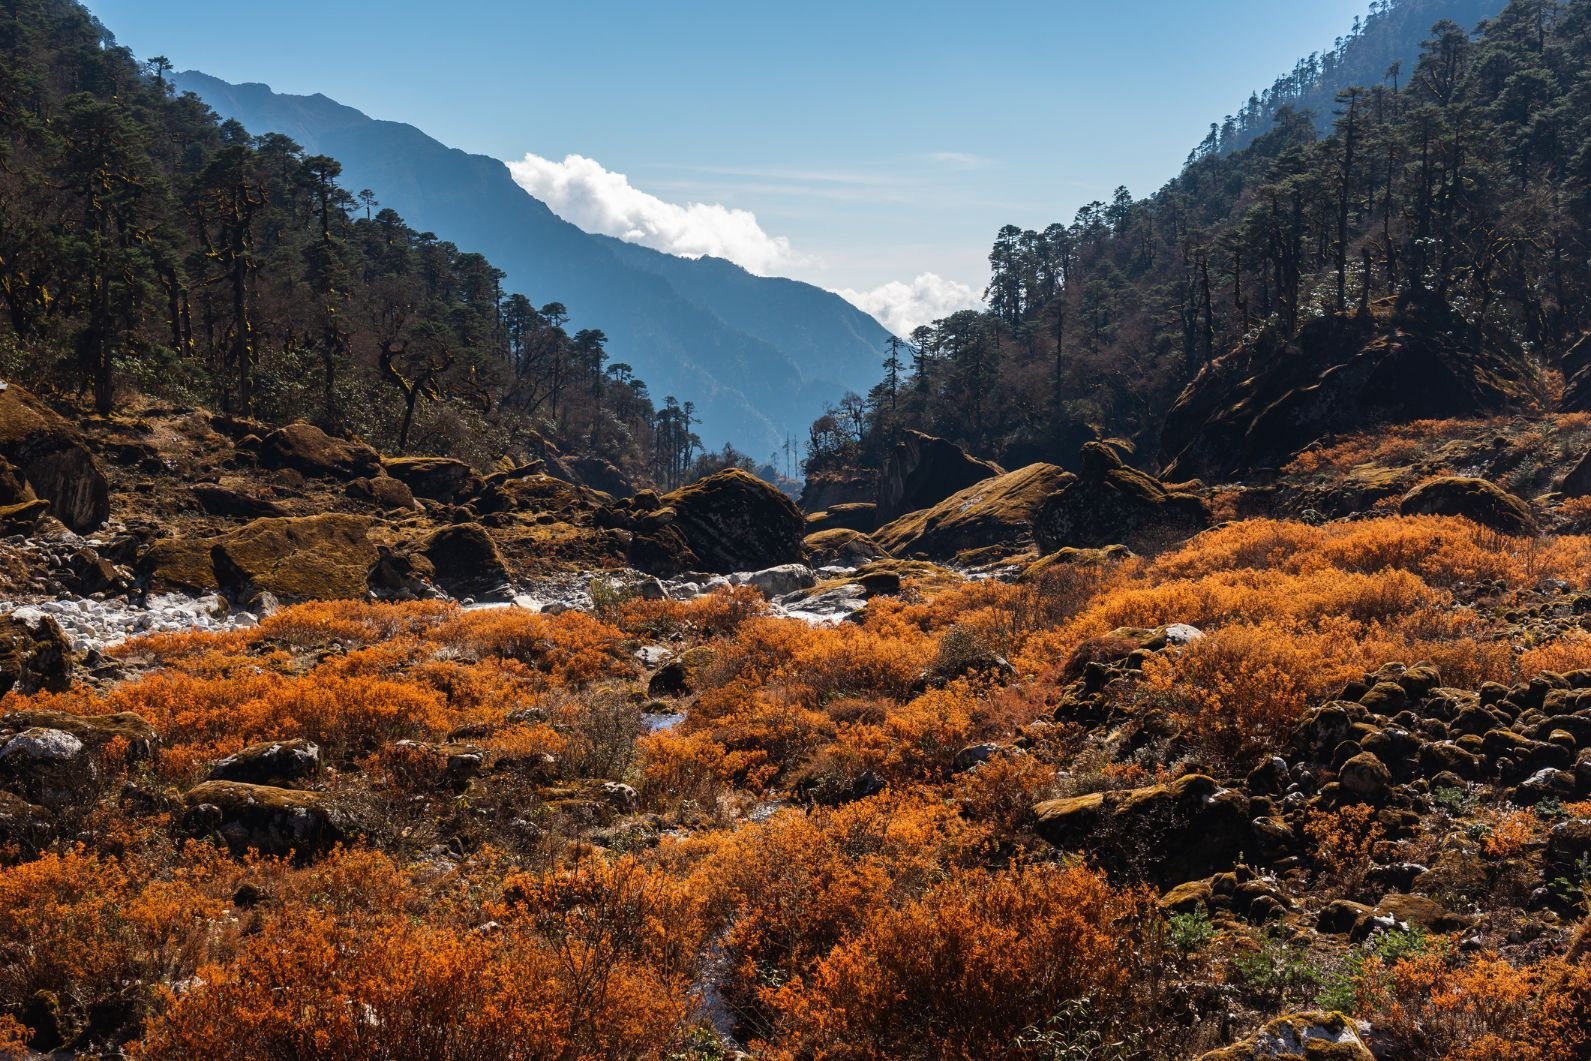 The landscapes on the way to Mera Peak are far-reaching, vibrant and serene. Photo: Getty